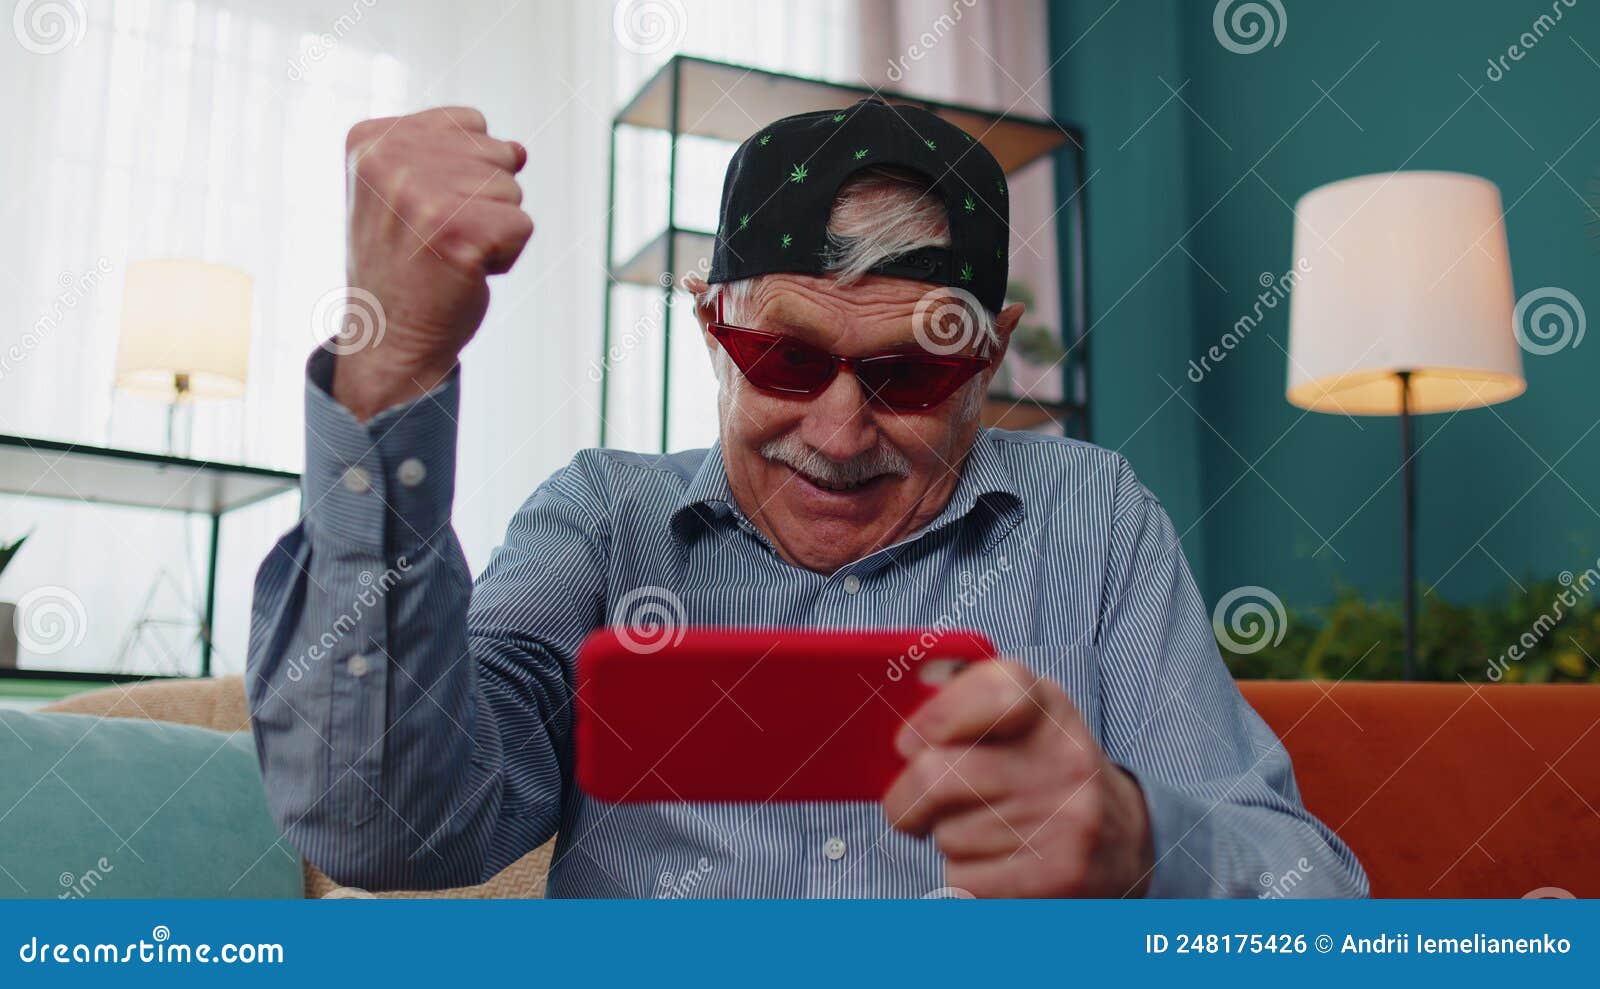 Worried Funny Senior Old Grandfather Man Playing Shooter Online Video Games on Mobile Phone at Home Stock Photo